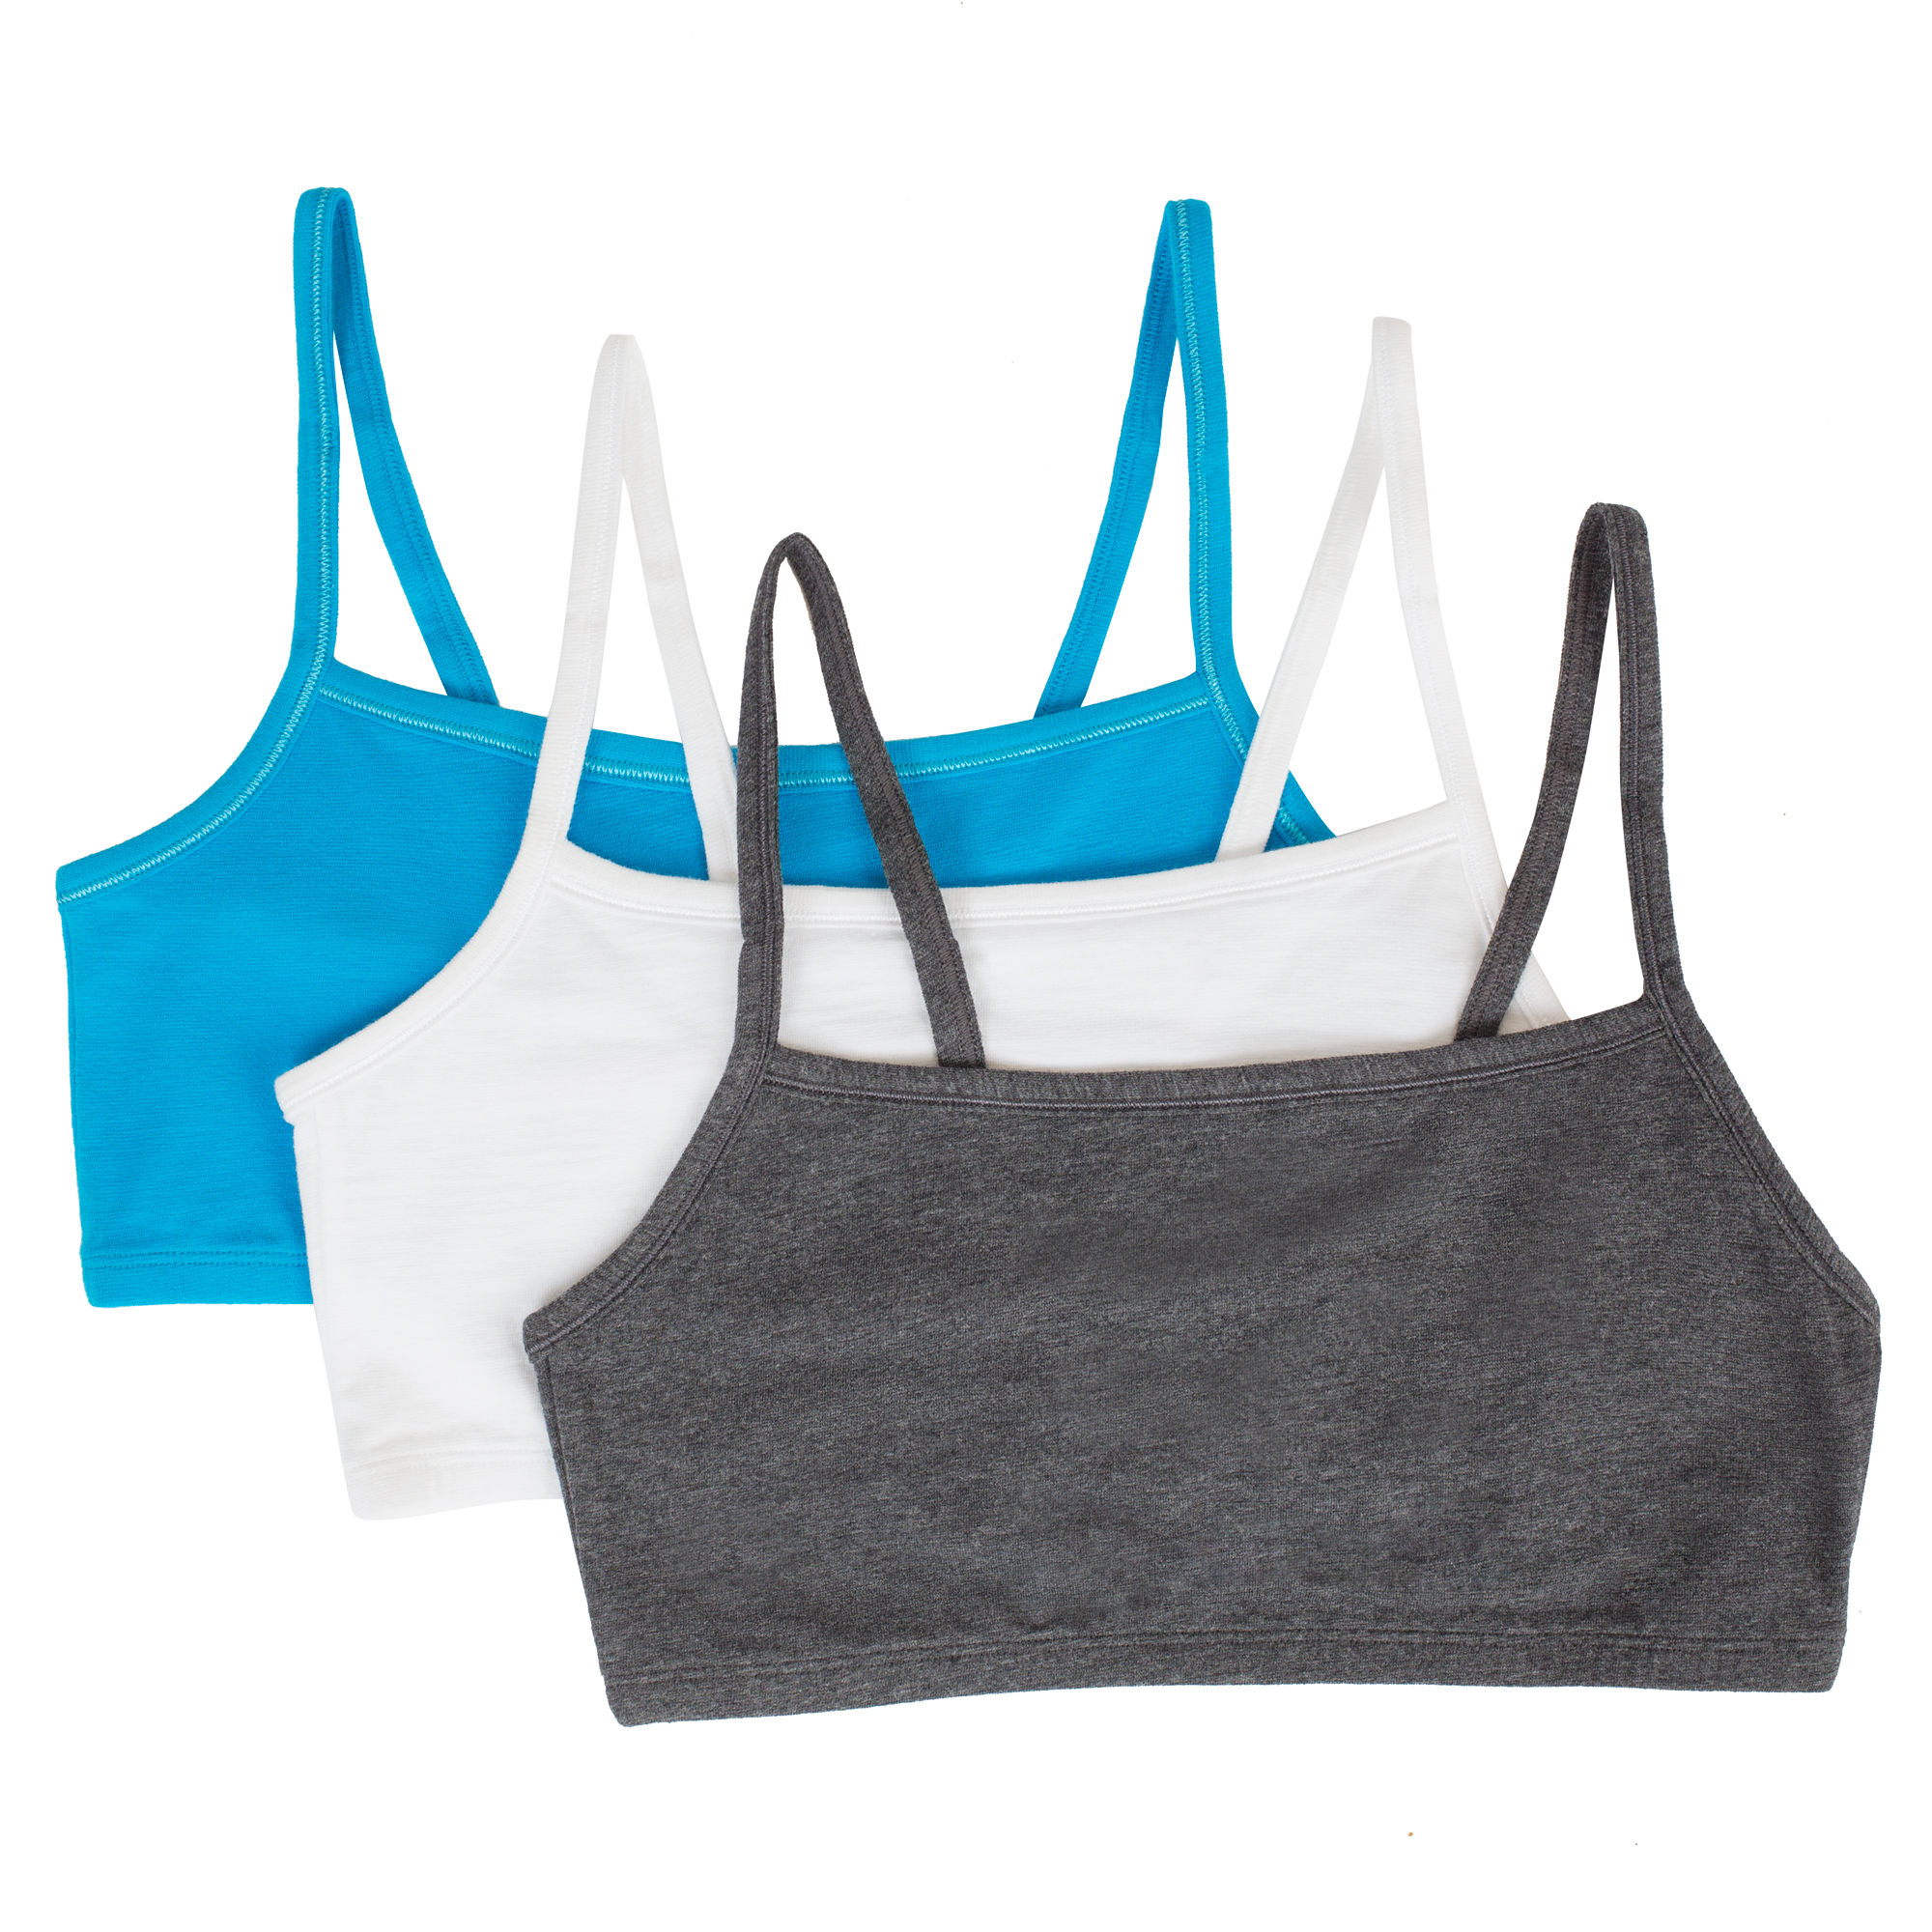 Fruit of the Loom Women's Spaghetti Strap Cotton Sports Bra, 3-Pack, Style-9036 - image 1 of 8